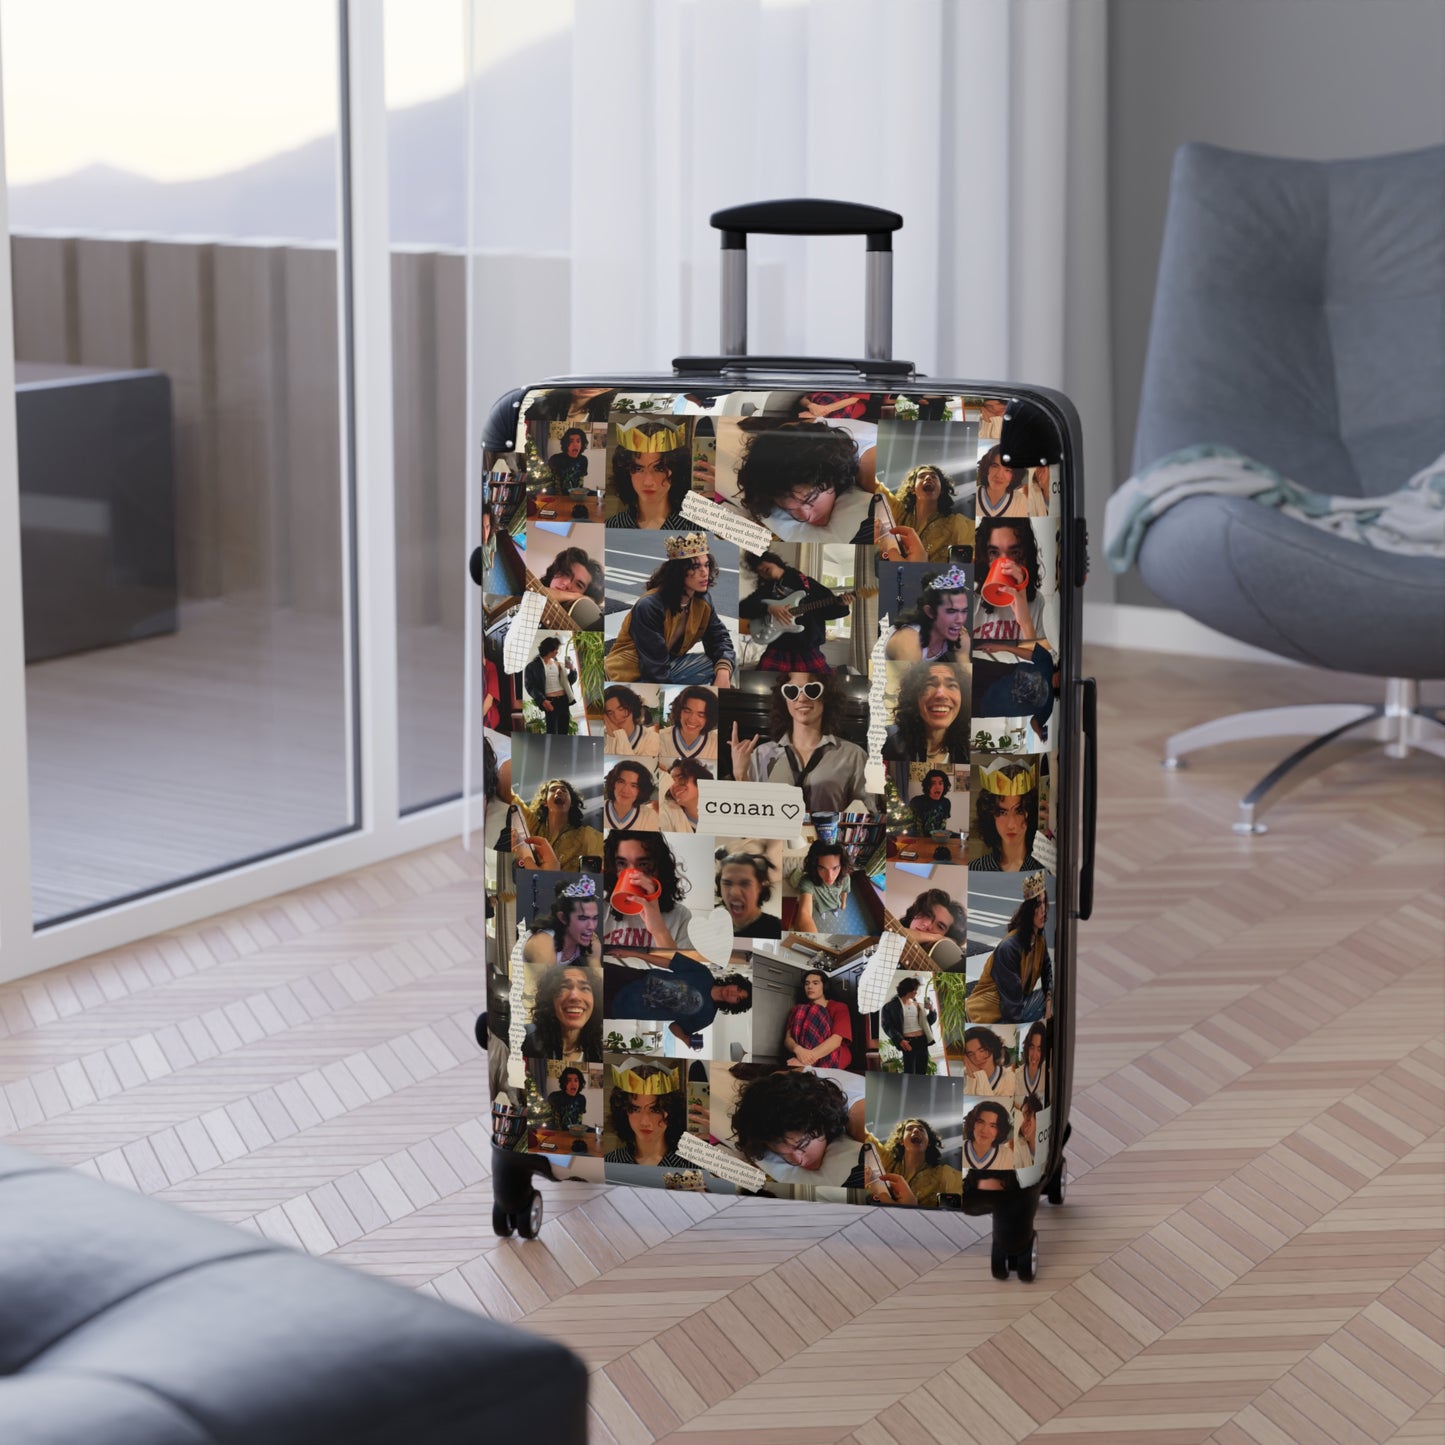 Conan Grey Being Cute Photo Collage Suitcase